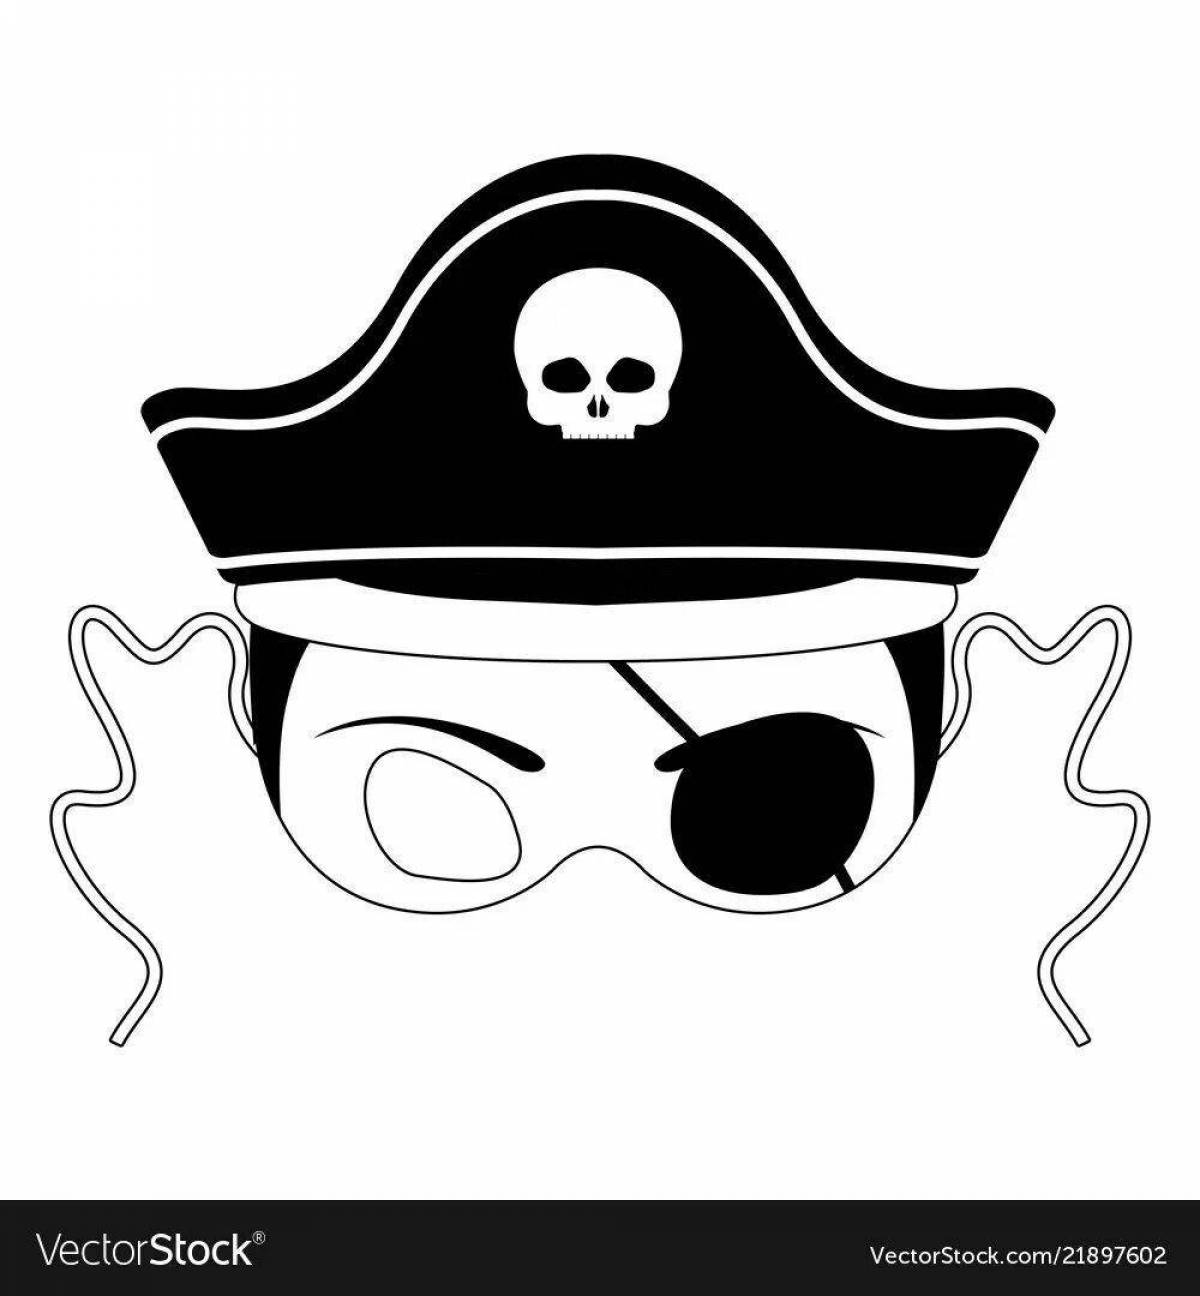 Exquisite pirate hat coloring page